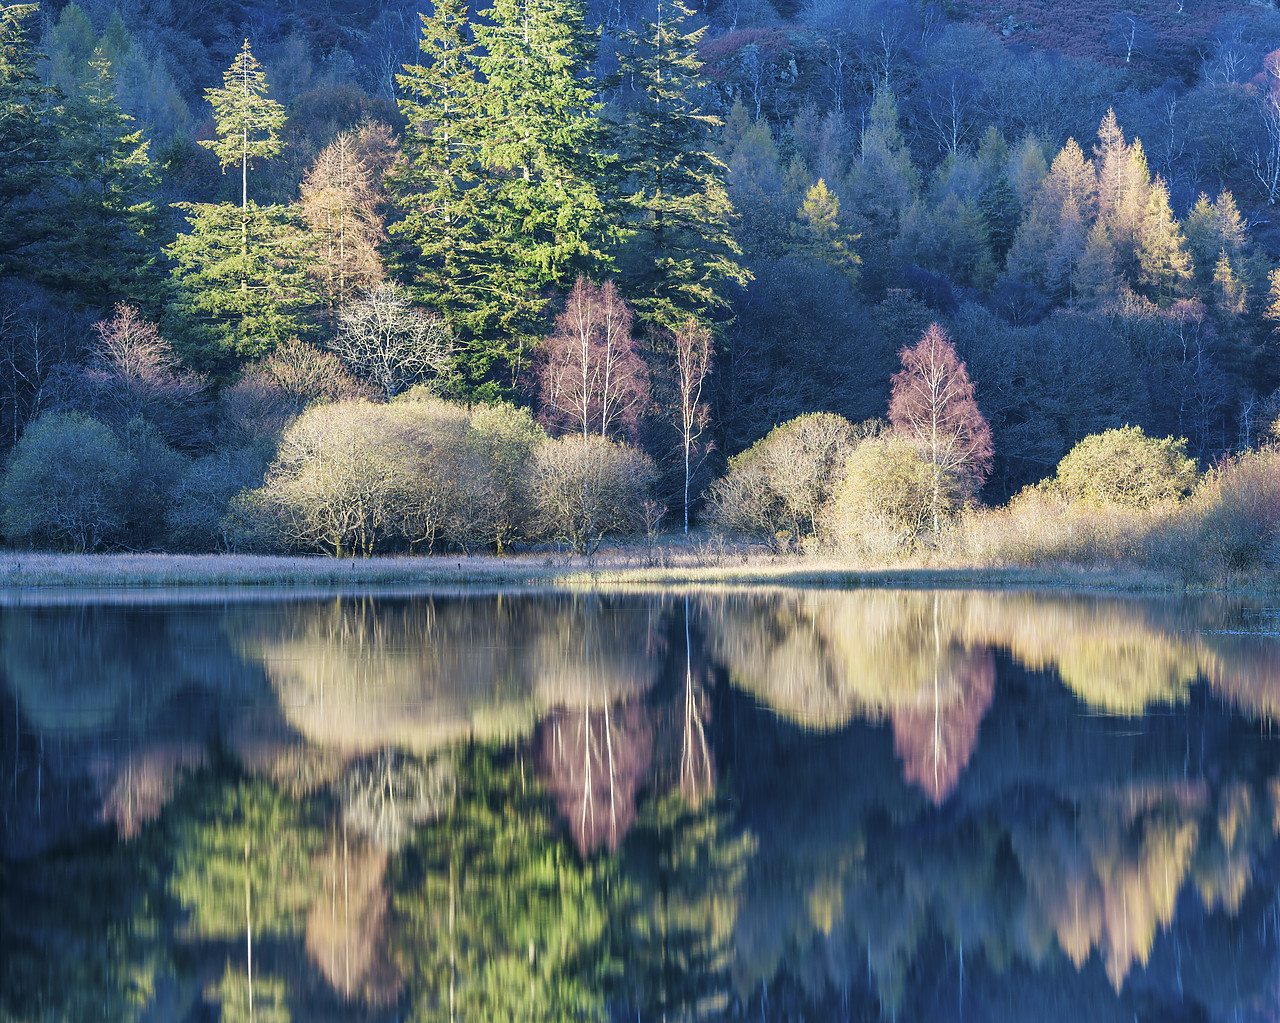 #140464-1 - Yew Tree Tarn Reflections, Lake District National Park, Cumbria, England